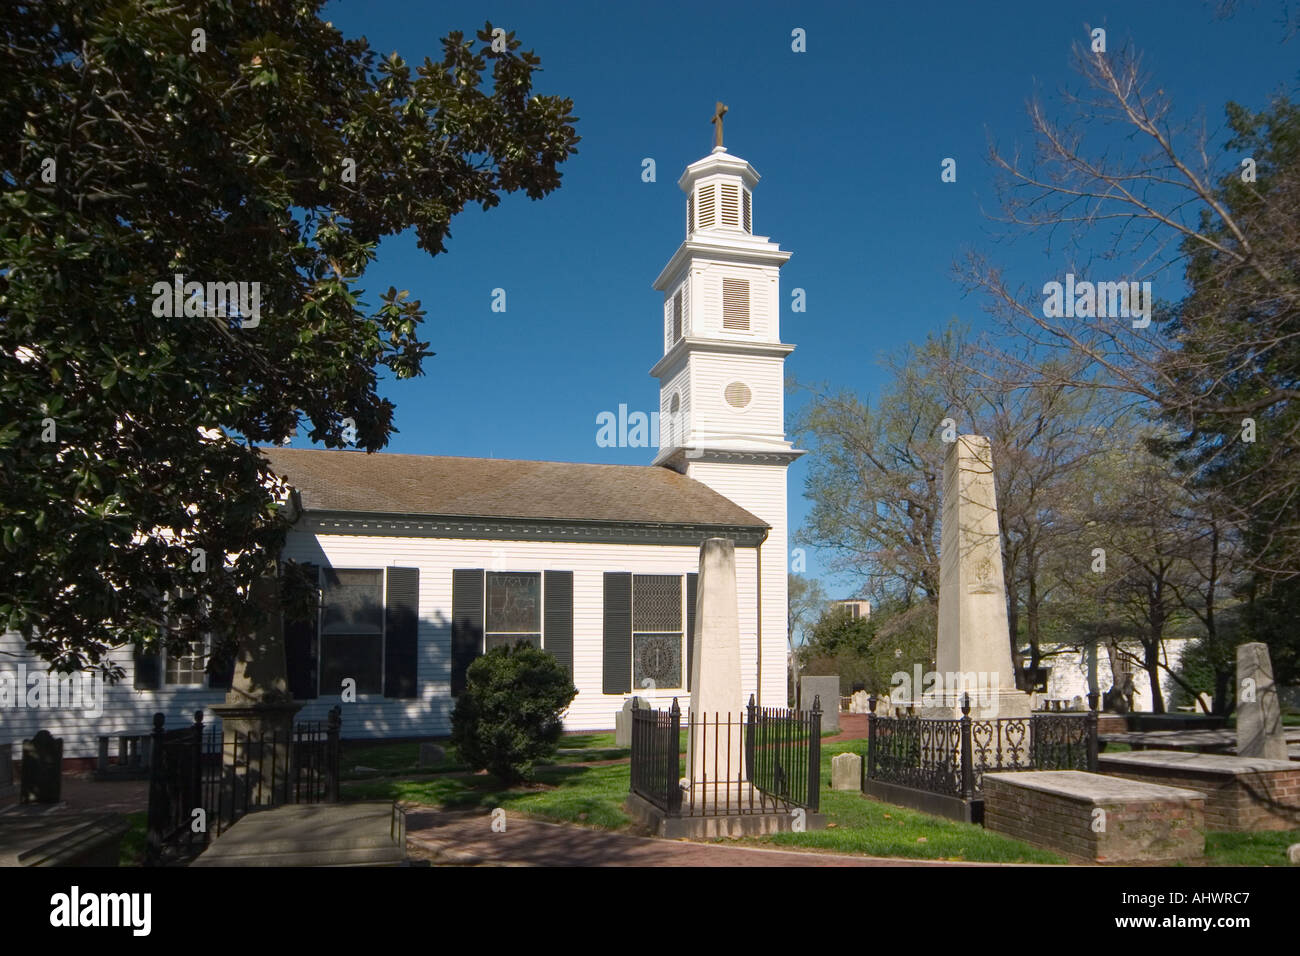 St John s Church built in 1741 the oldest Richmond church site of Patrick Henry s give me liberty or give me death speech  Stock Photo